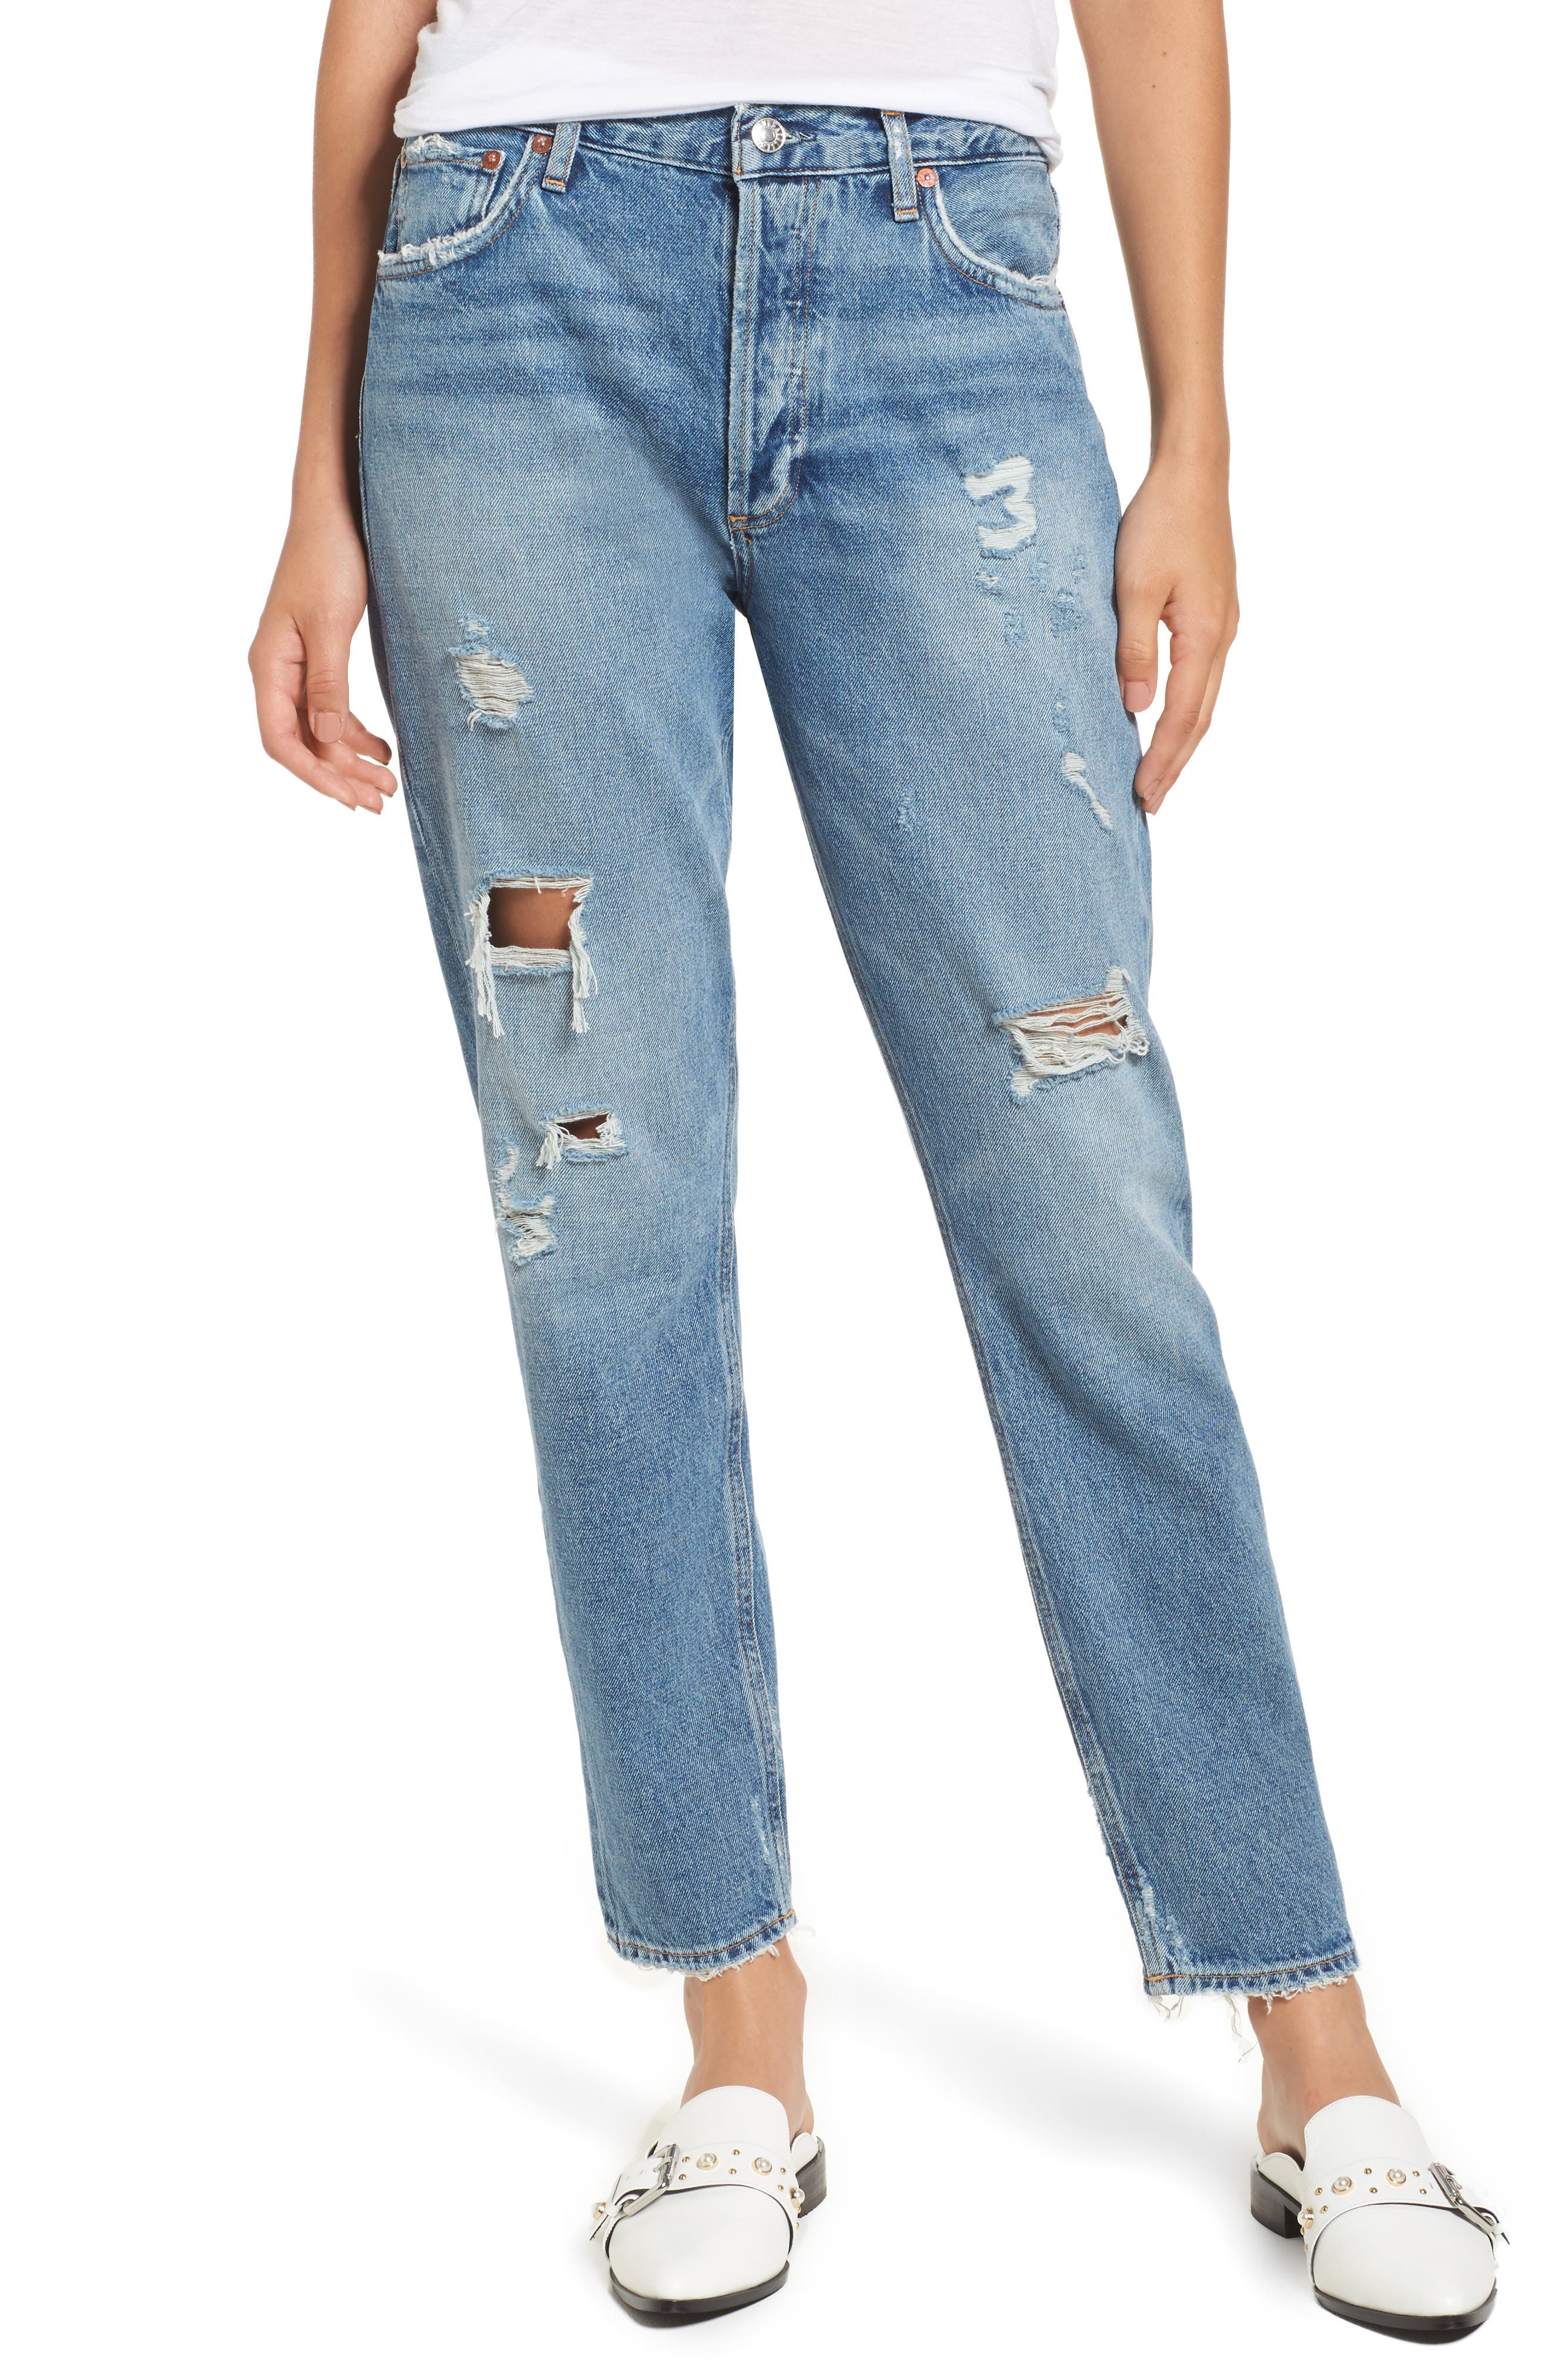 rugged jeans for girl